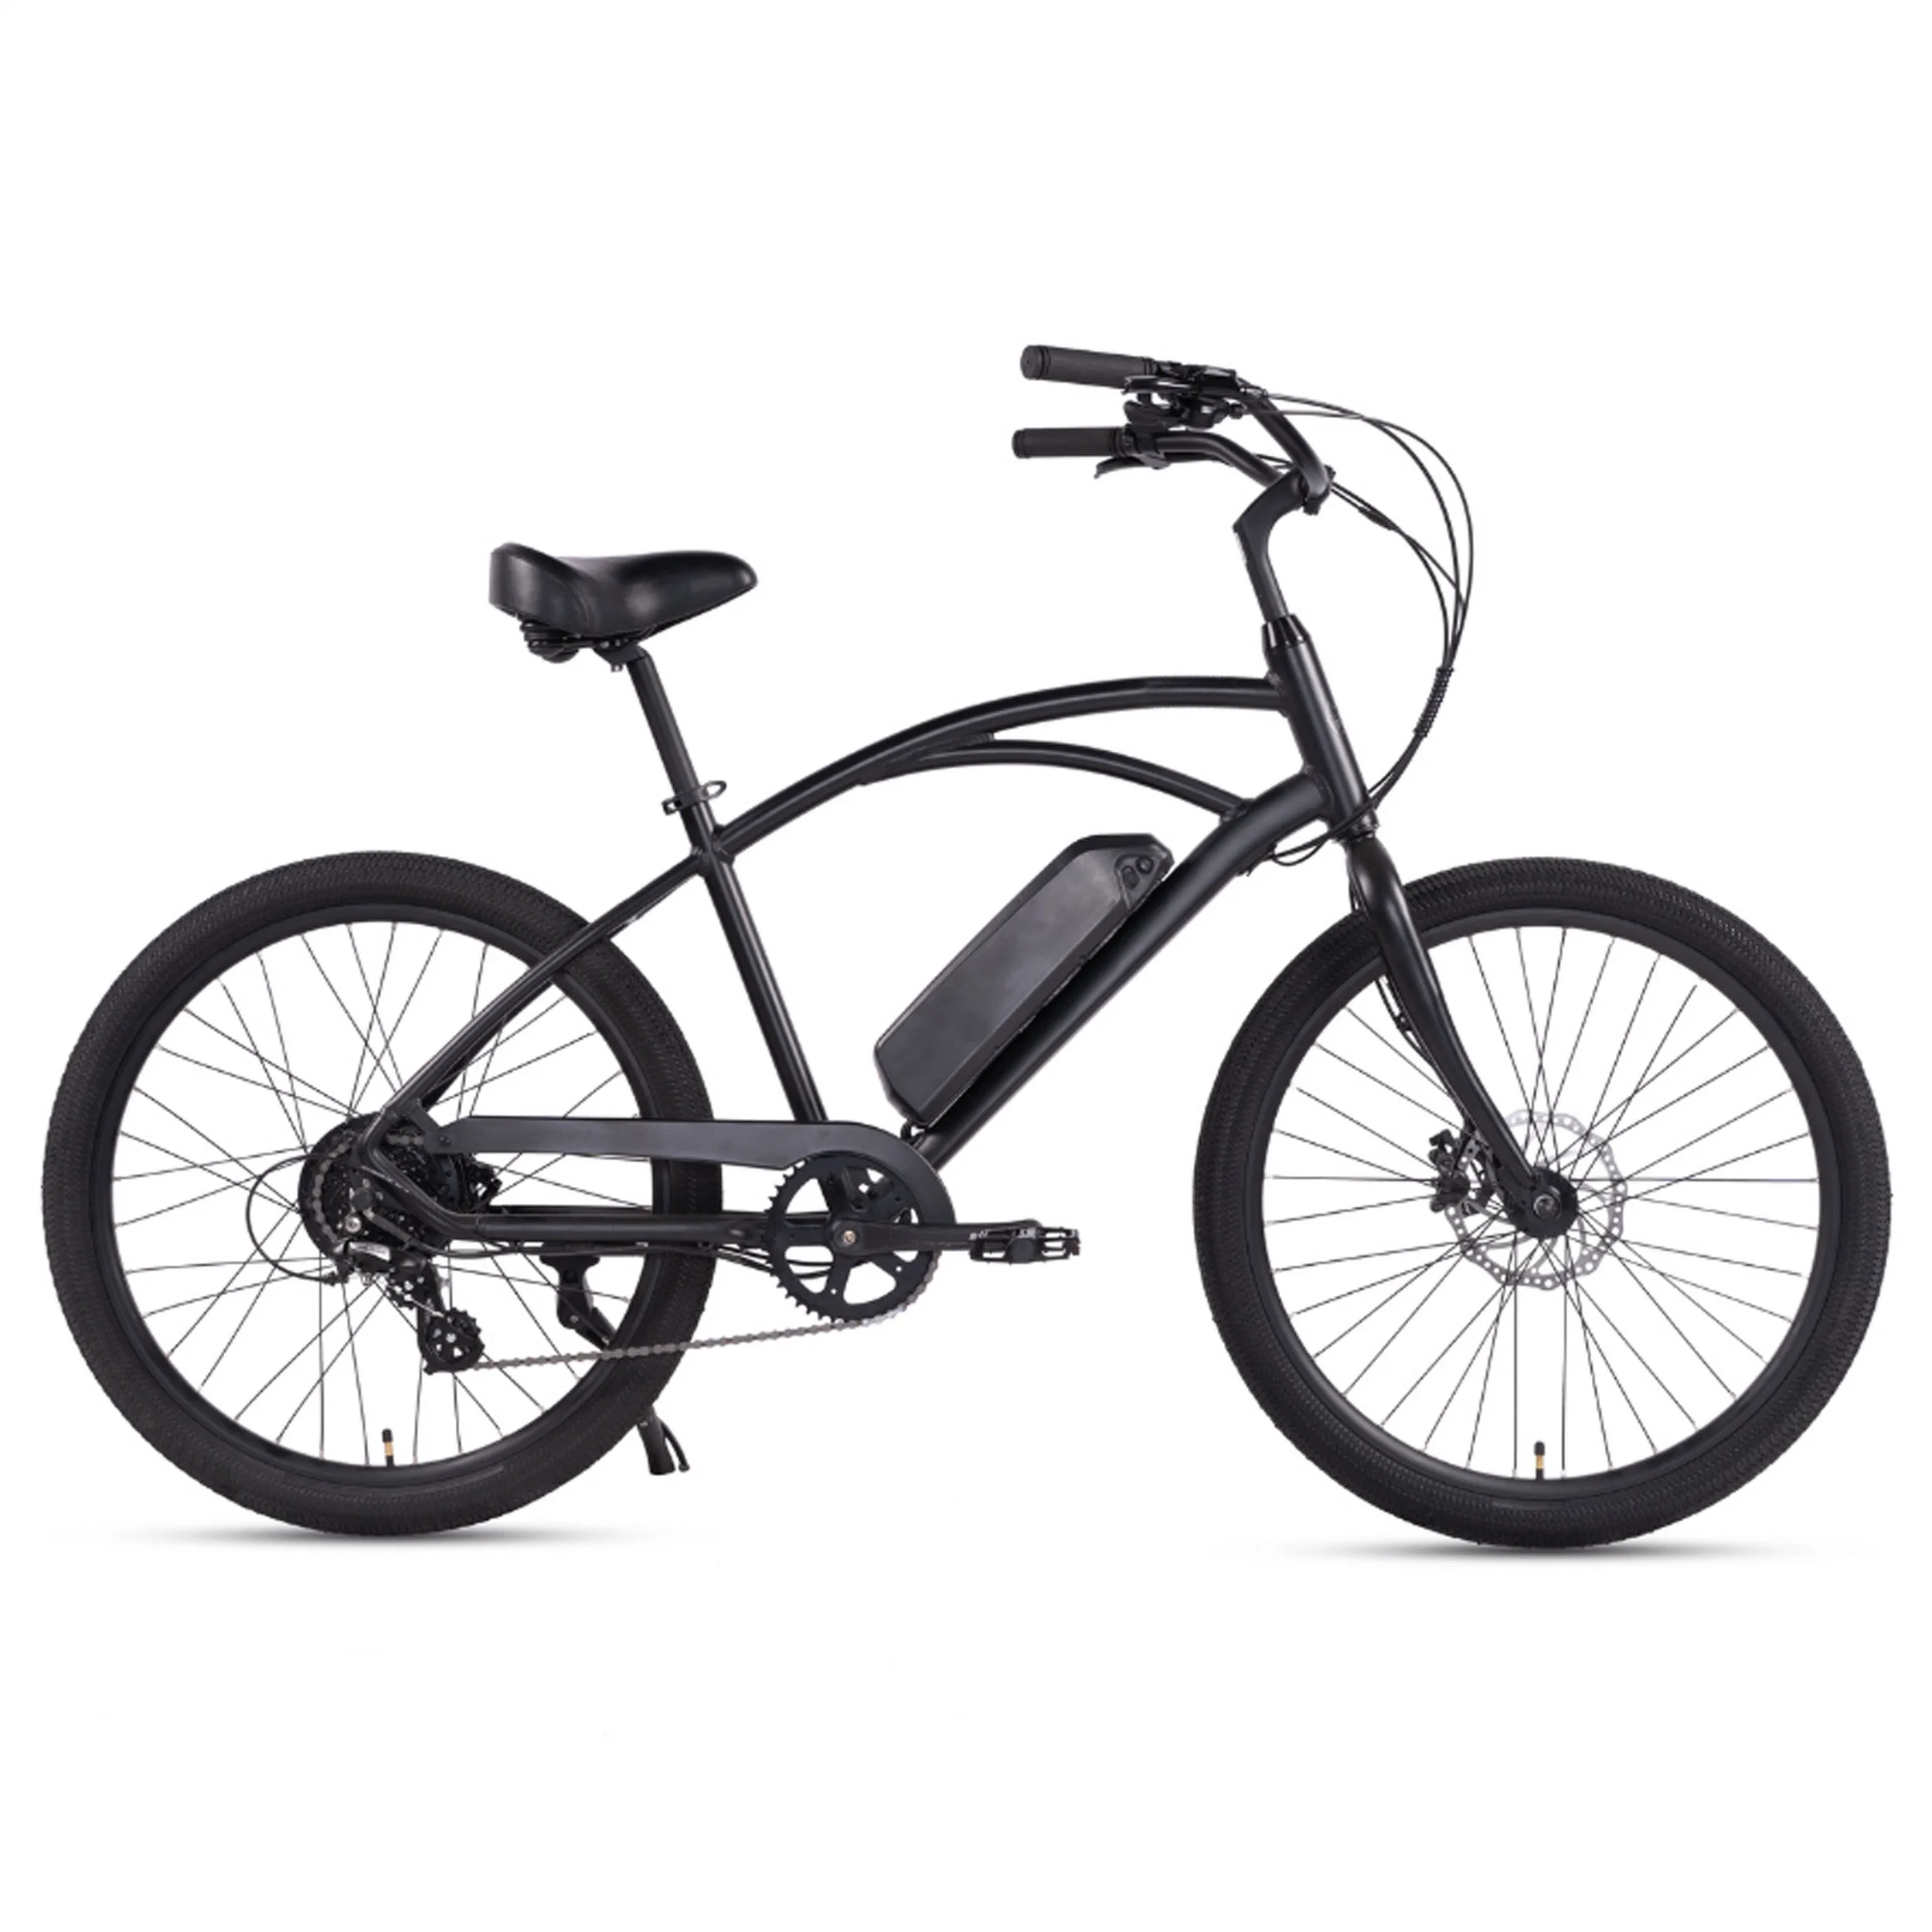 Wholesale/Suppliers 350W/500W750W/1000W Fat Tires Tour/Urban/City/Commute/Mini/Mountain/MTB/Dirt /Cargo Bike Foldable/Unfoldable Electric Ebicycle E Bicycle